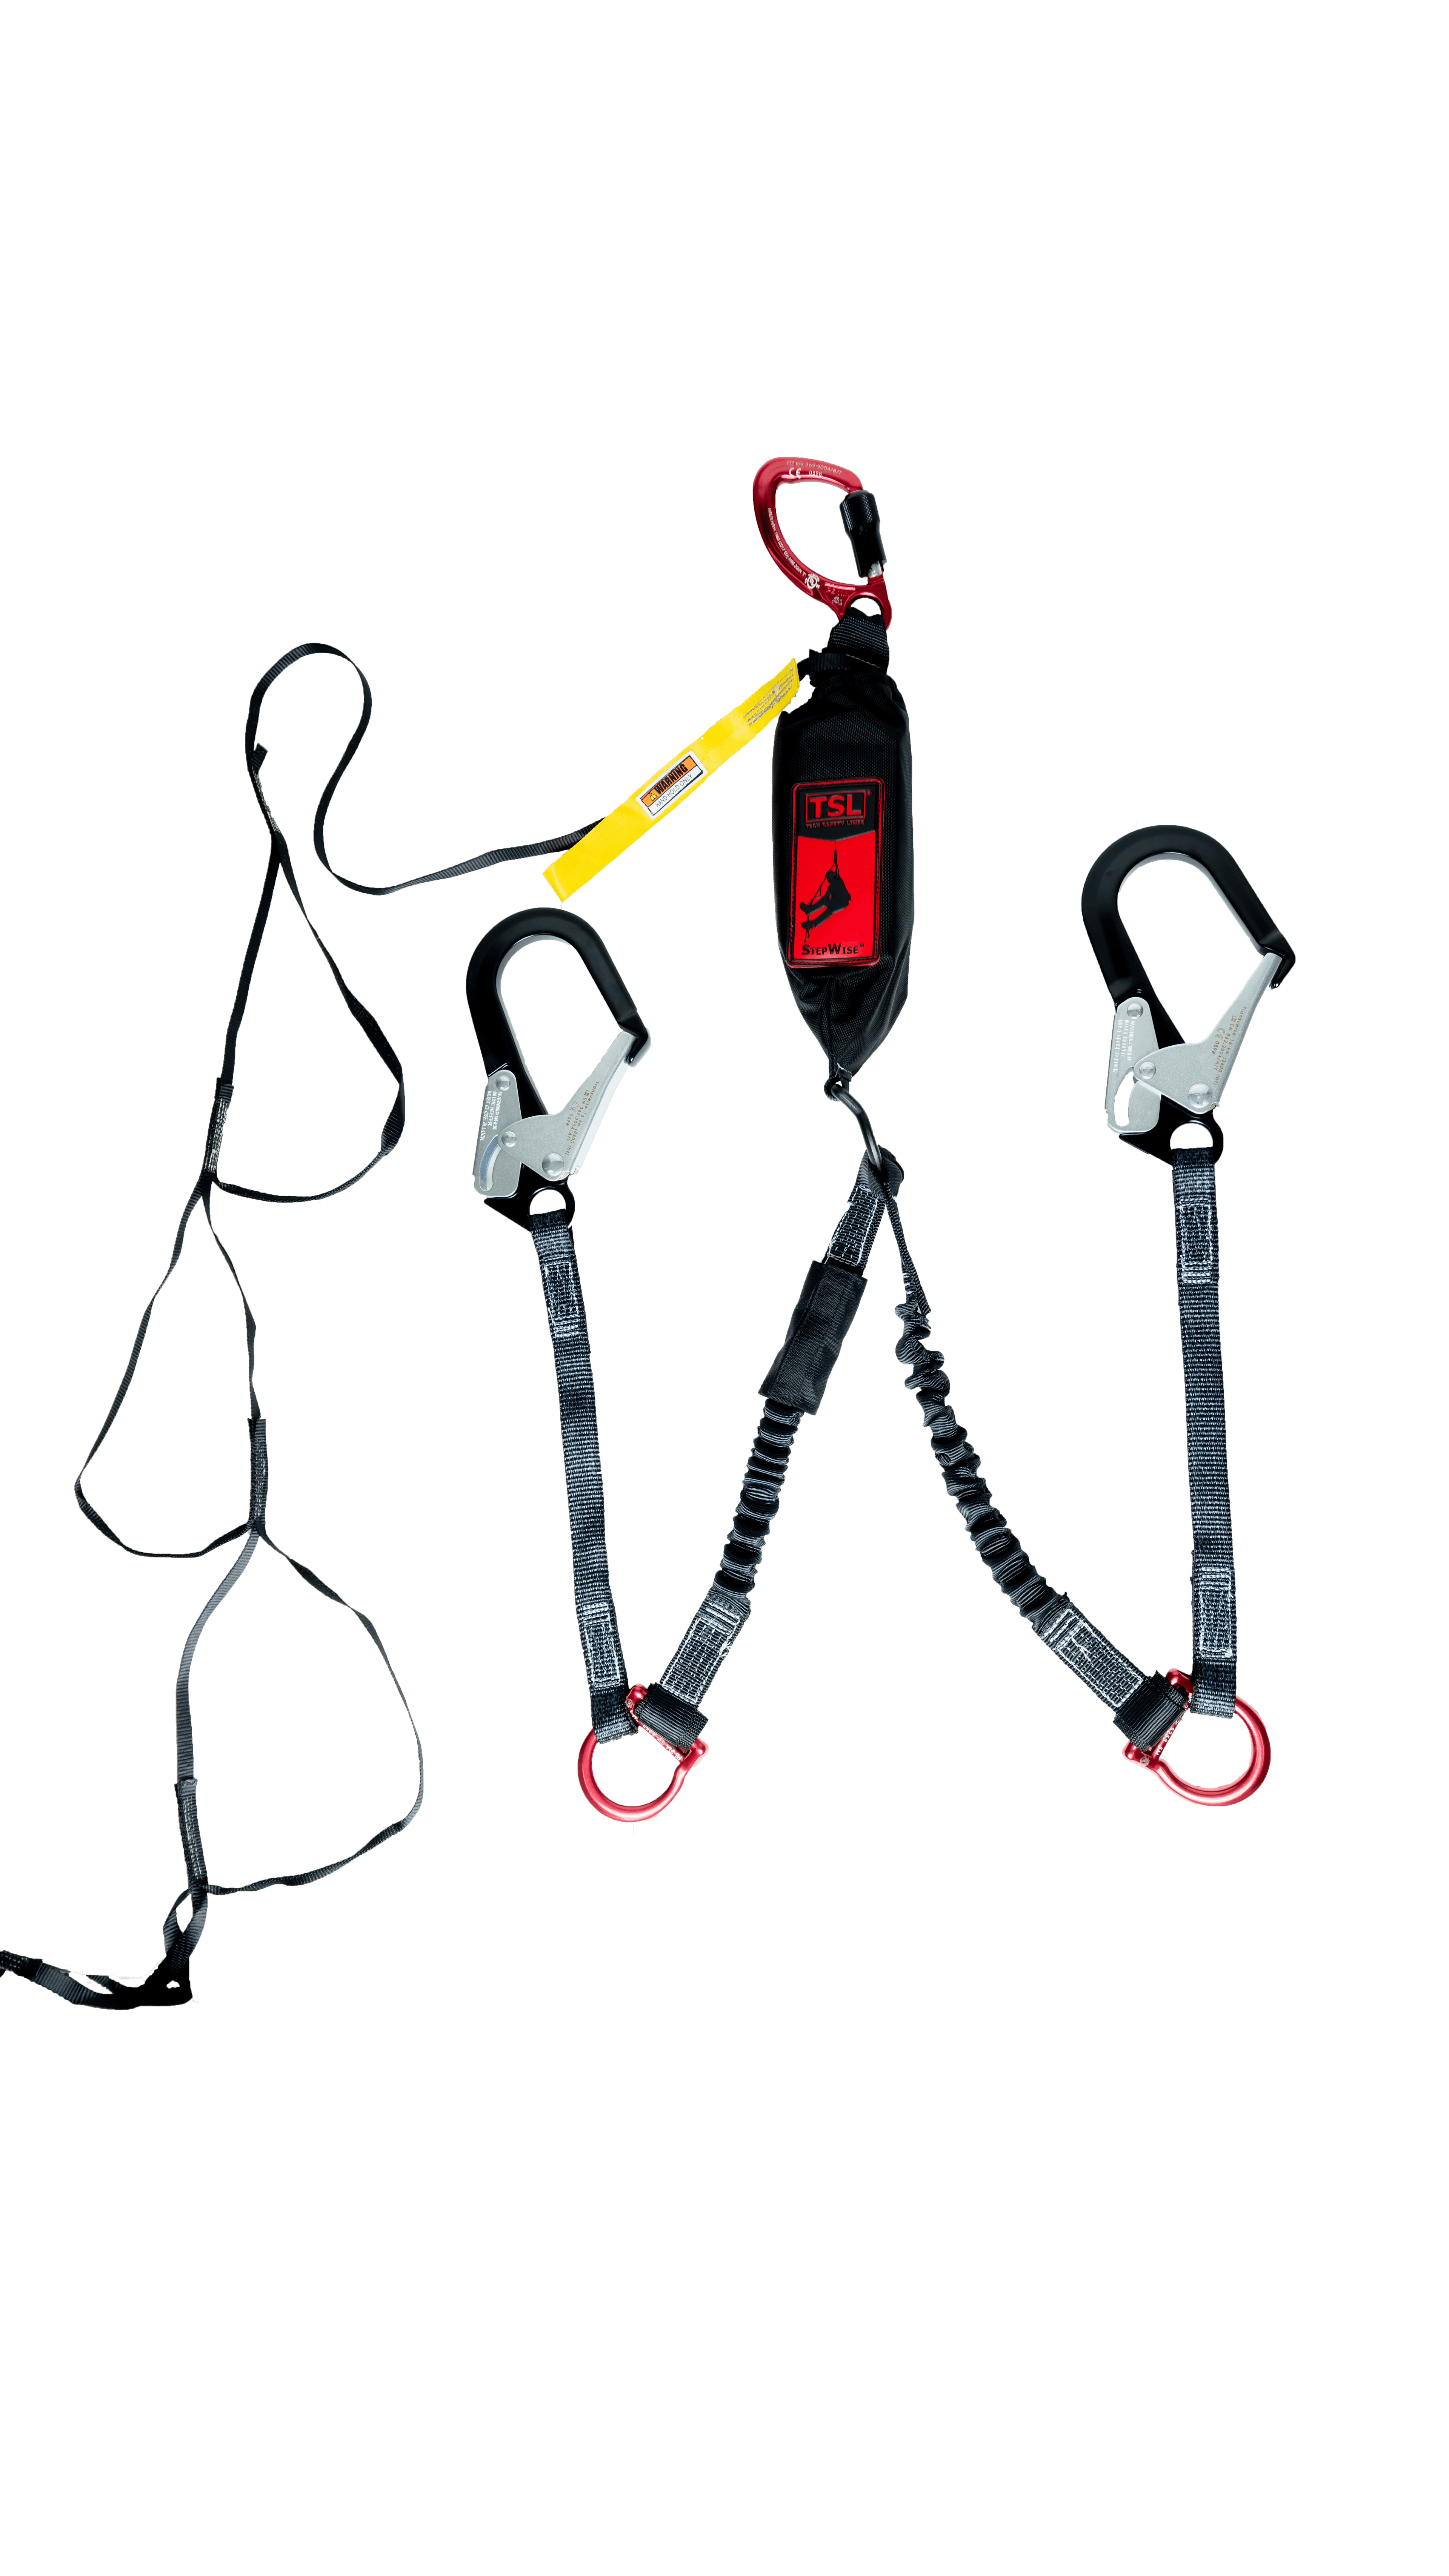 stepwise two leg lanyard full view with ladder